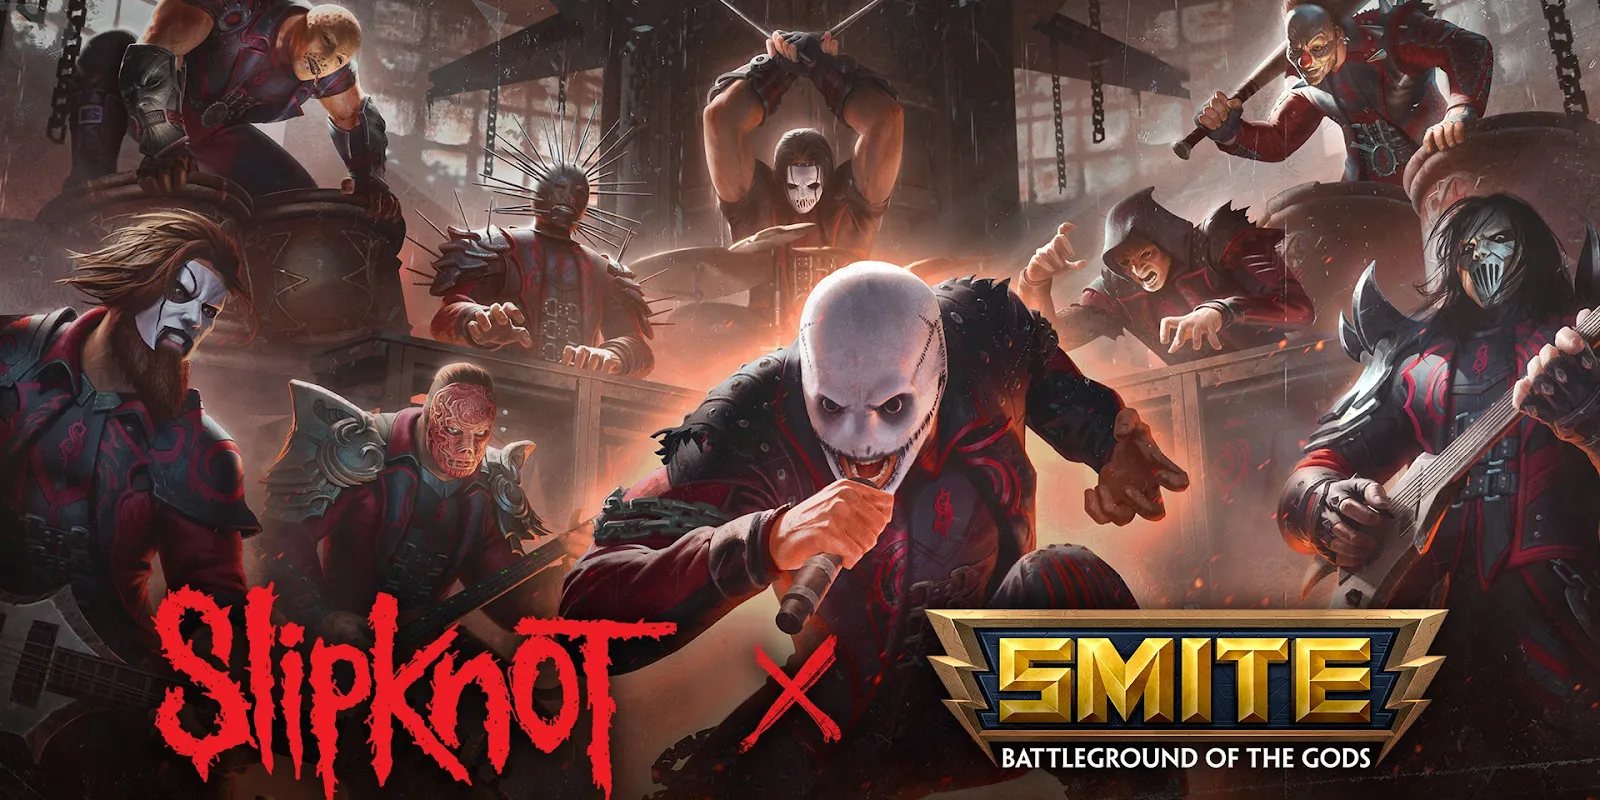 One of the events in Smite featured Slipknot, believe it or not.